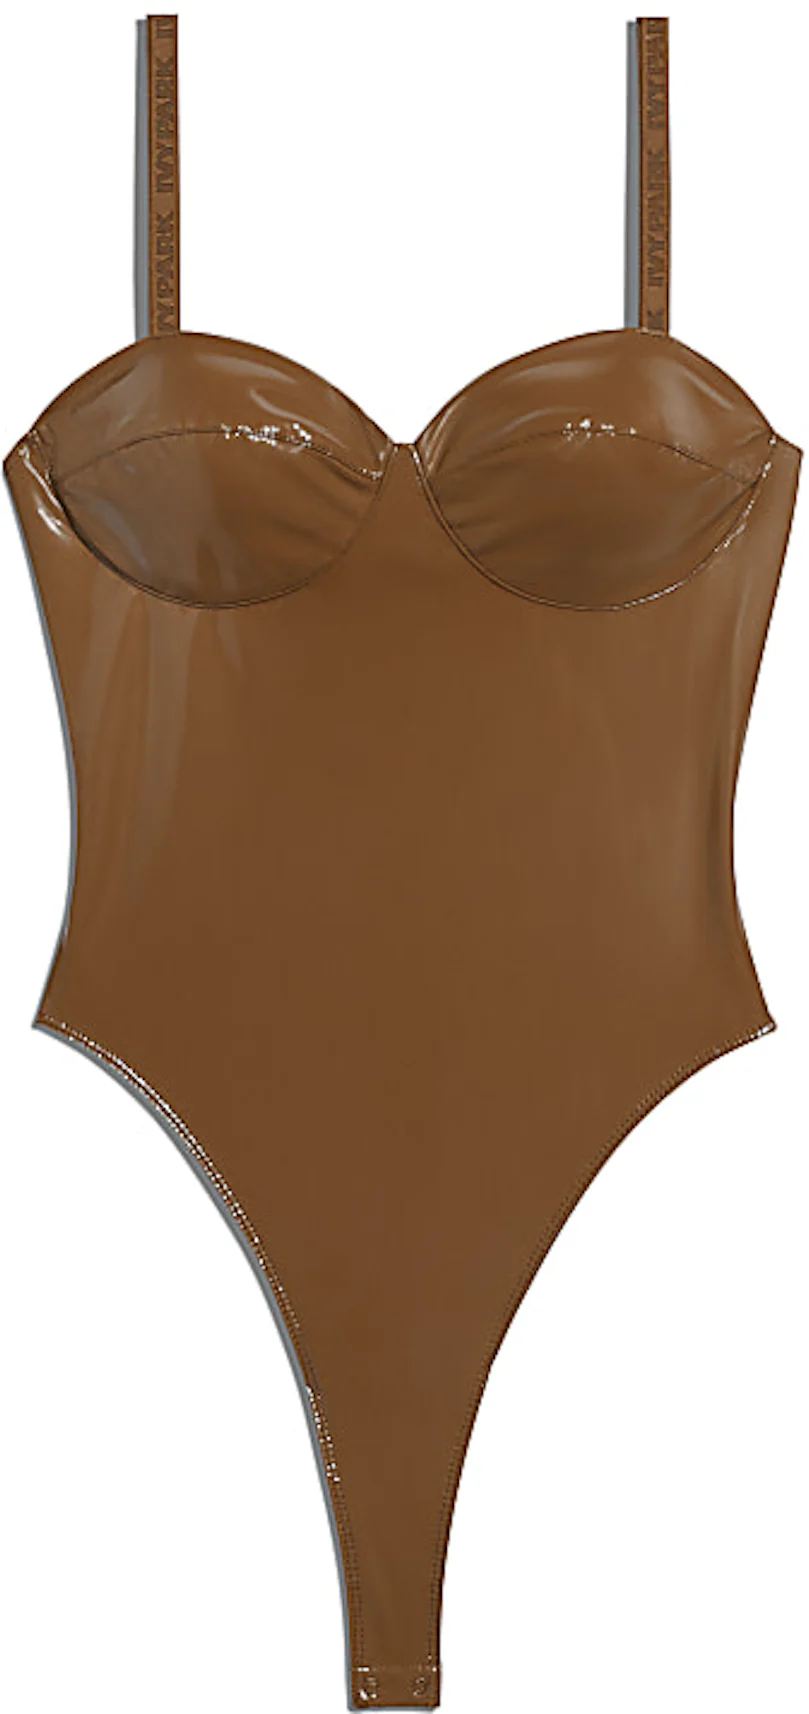 SELLING: Ivy Park x Adidas. Brown latex bodysuit size S and glory